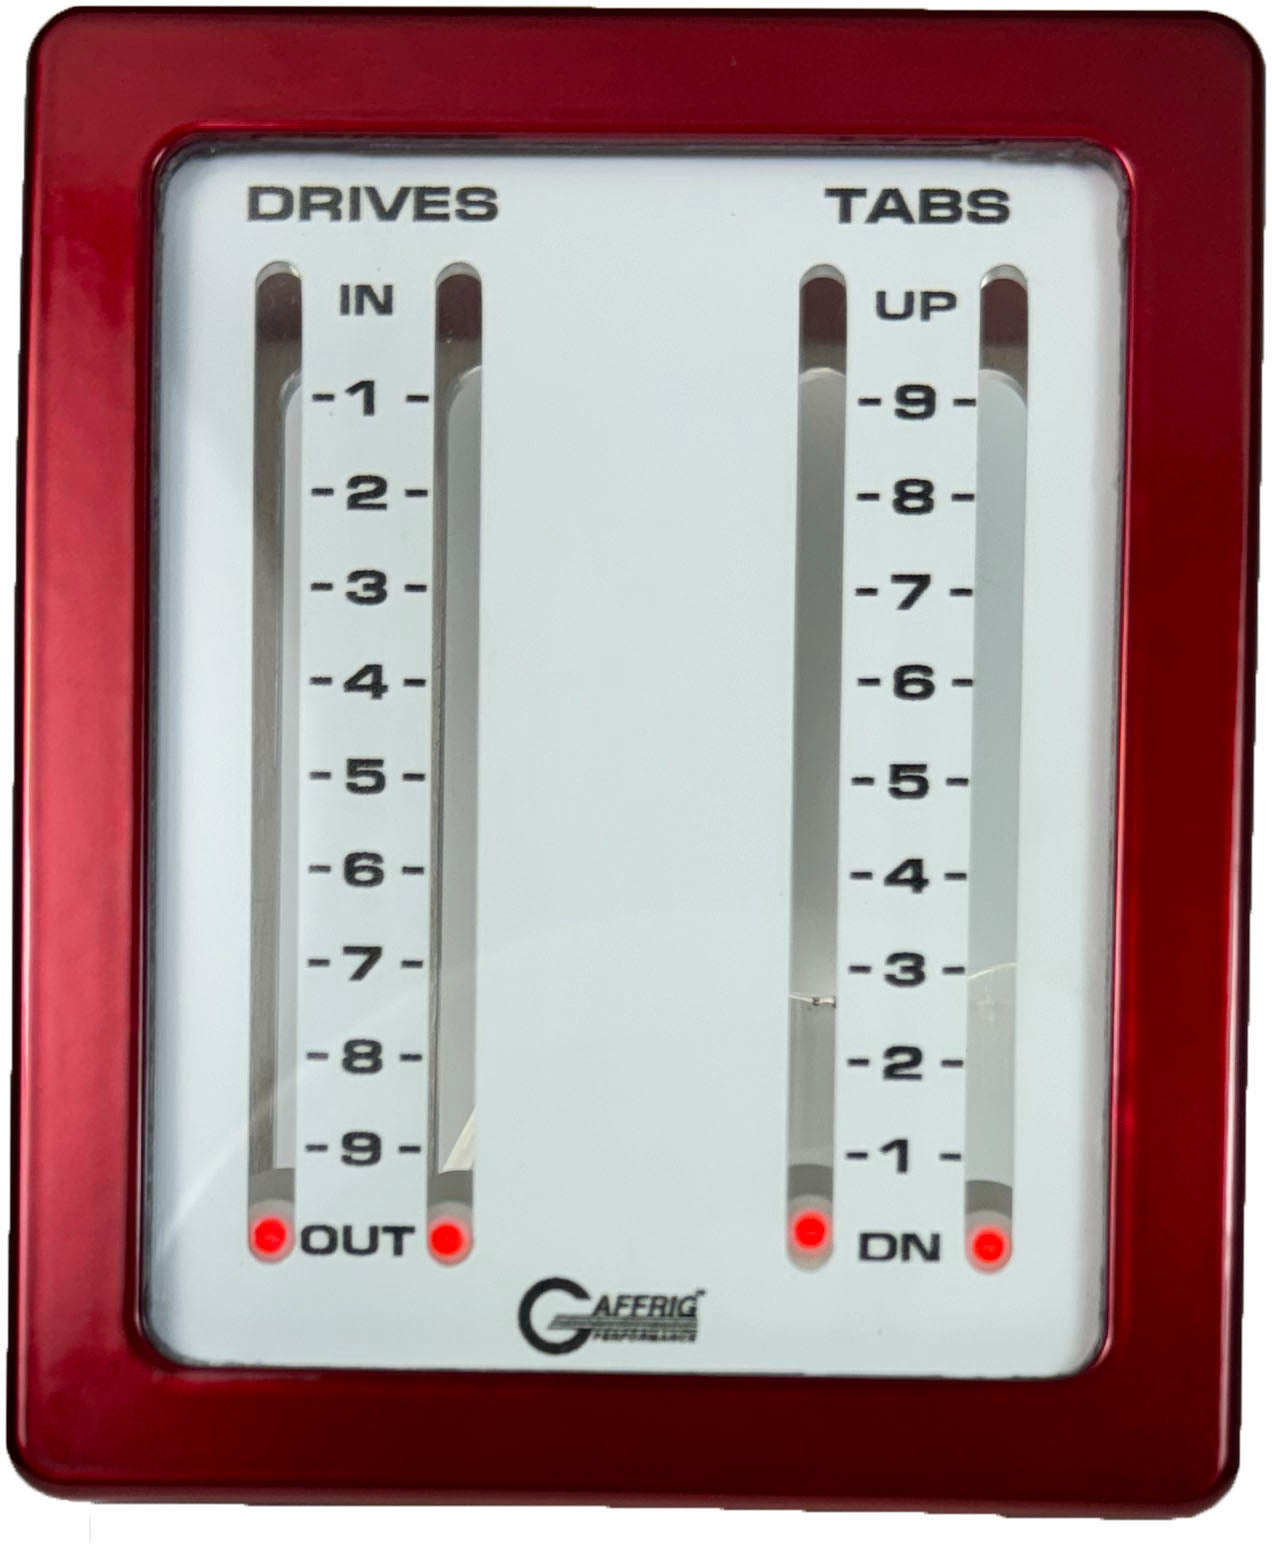 GAFFRIG PART #205 MECHANICAL INDICATOR, 2 DRIVES/2 TABS, MERCURY- CARD - WHITE DIAL RED